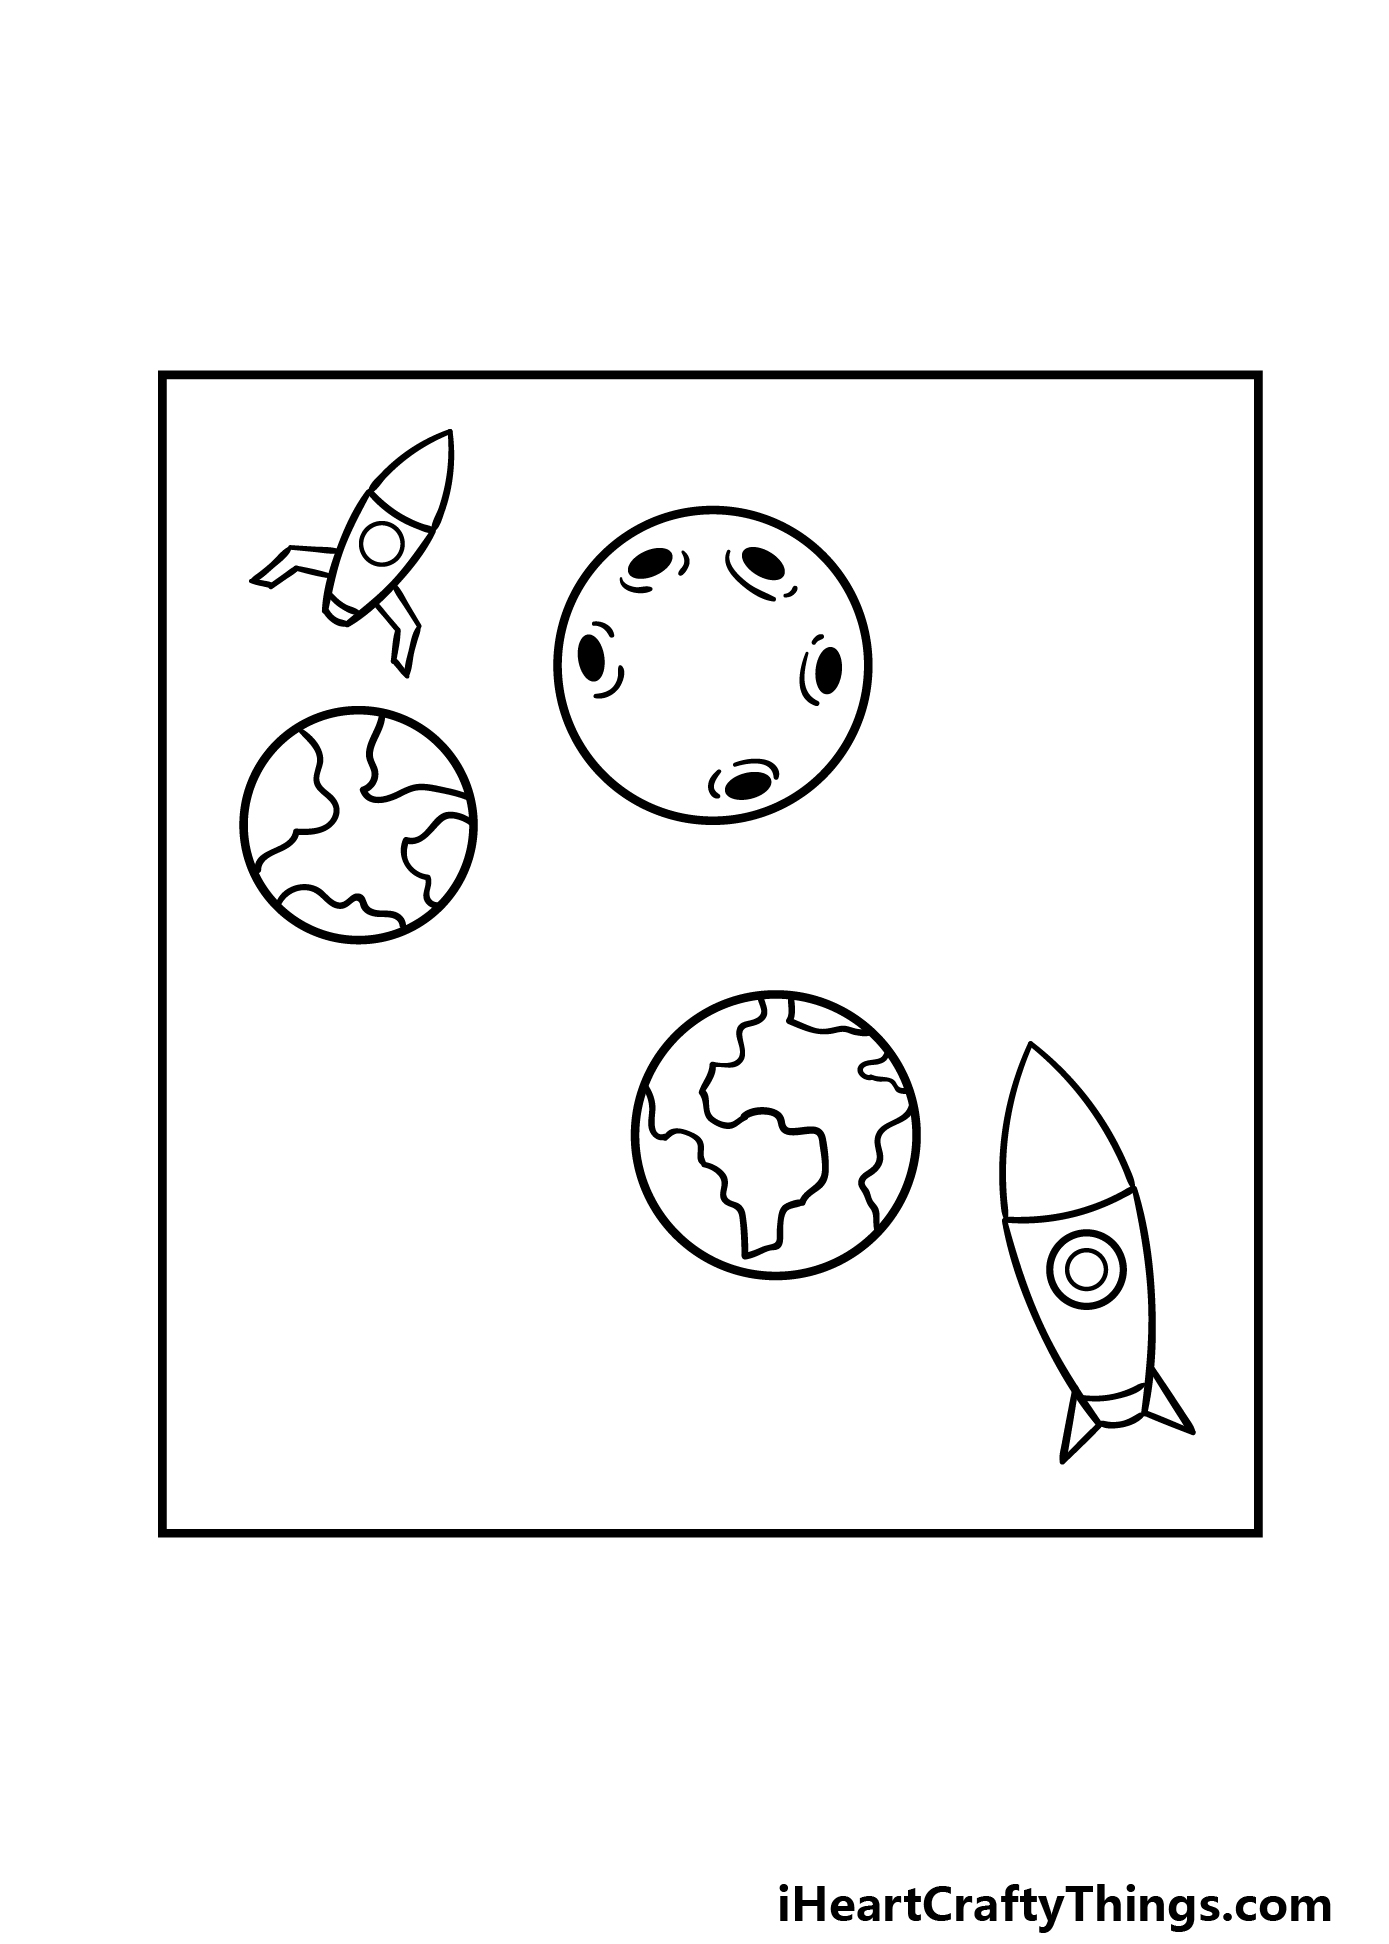 how to draw a cartoon space step 4